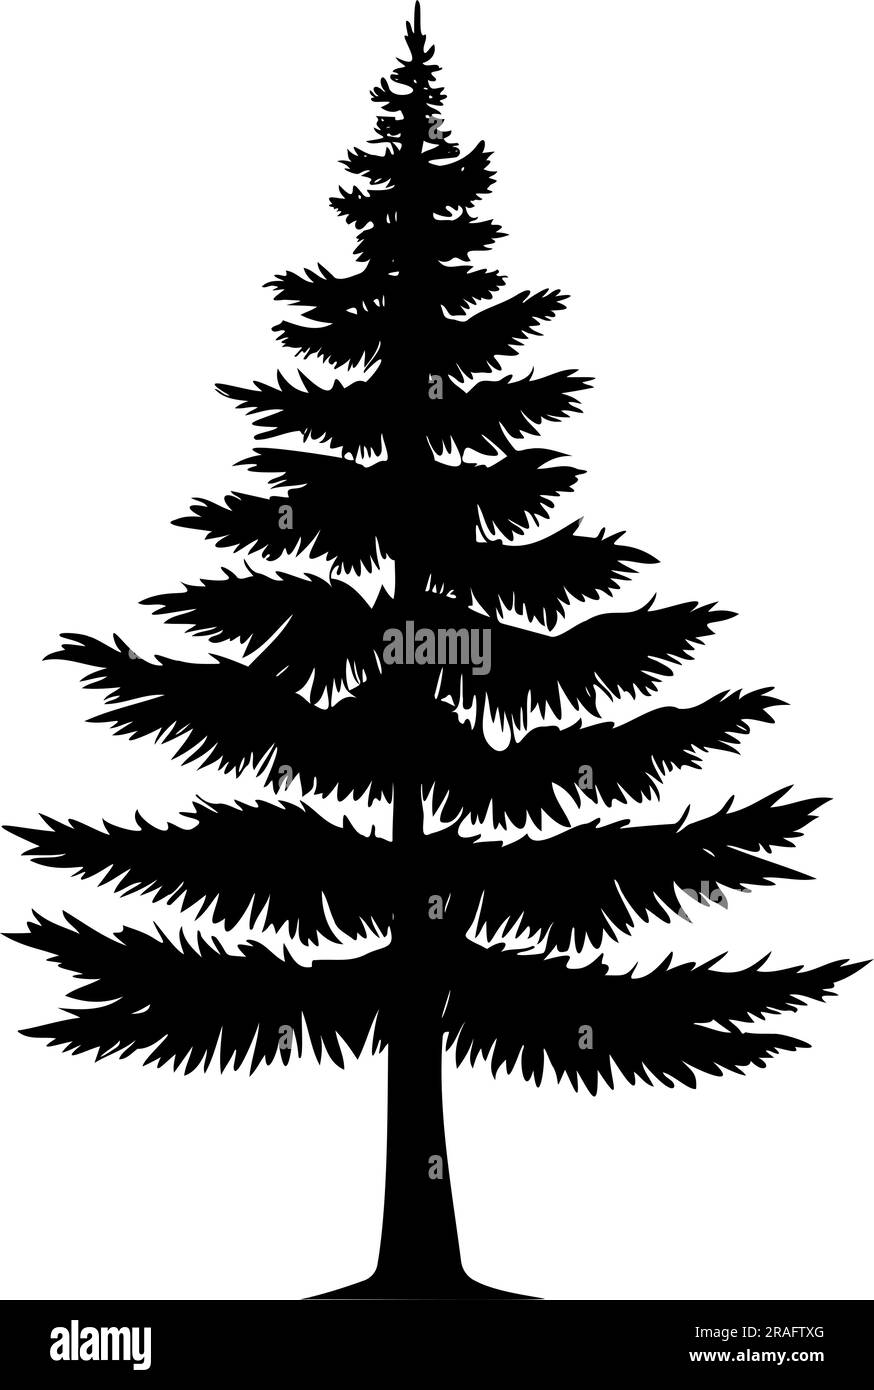 Conifer tree silhouette isolated on white background. vector illustration Stock Vector